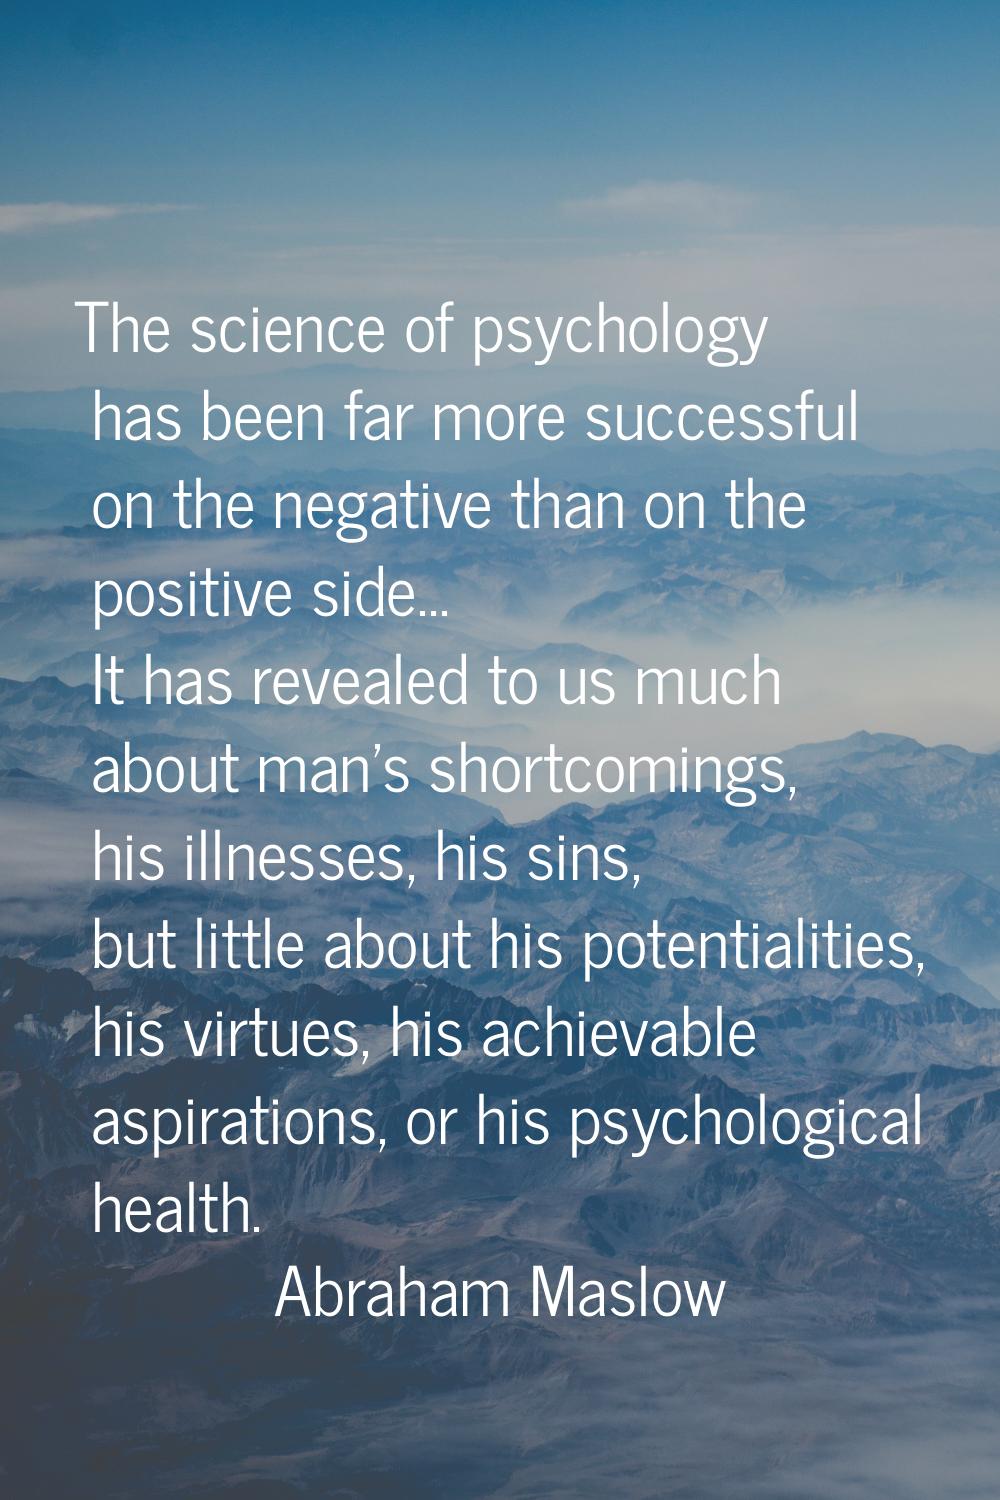 The science of psychology has been far more successful on the negative than on the positive side...